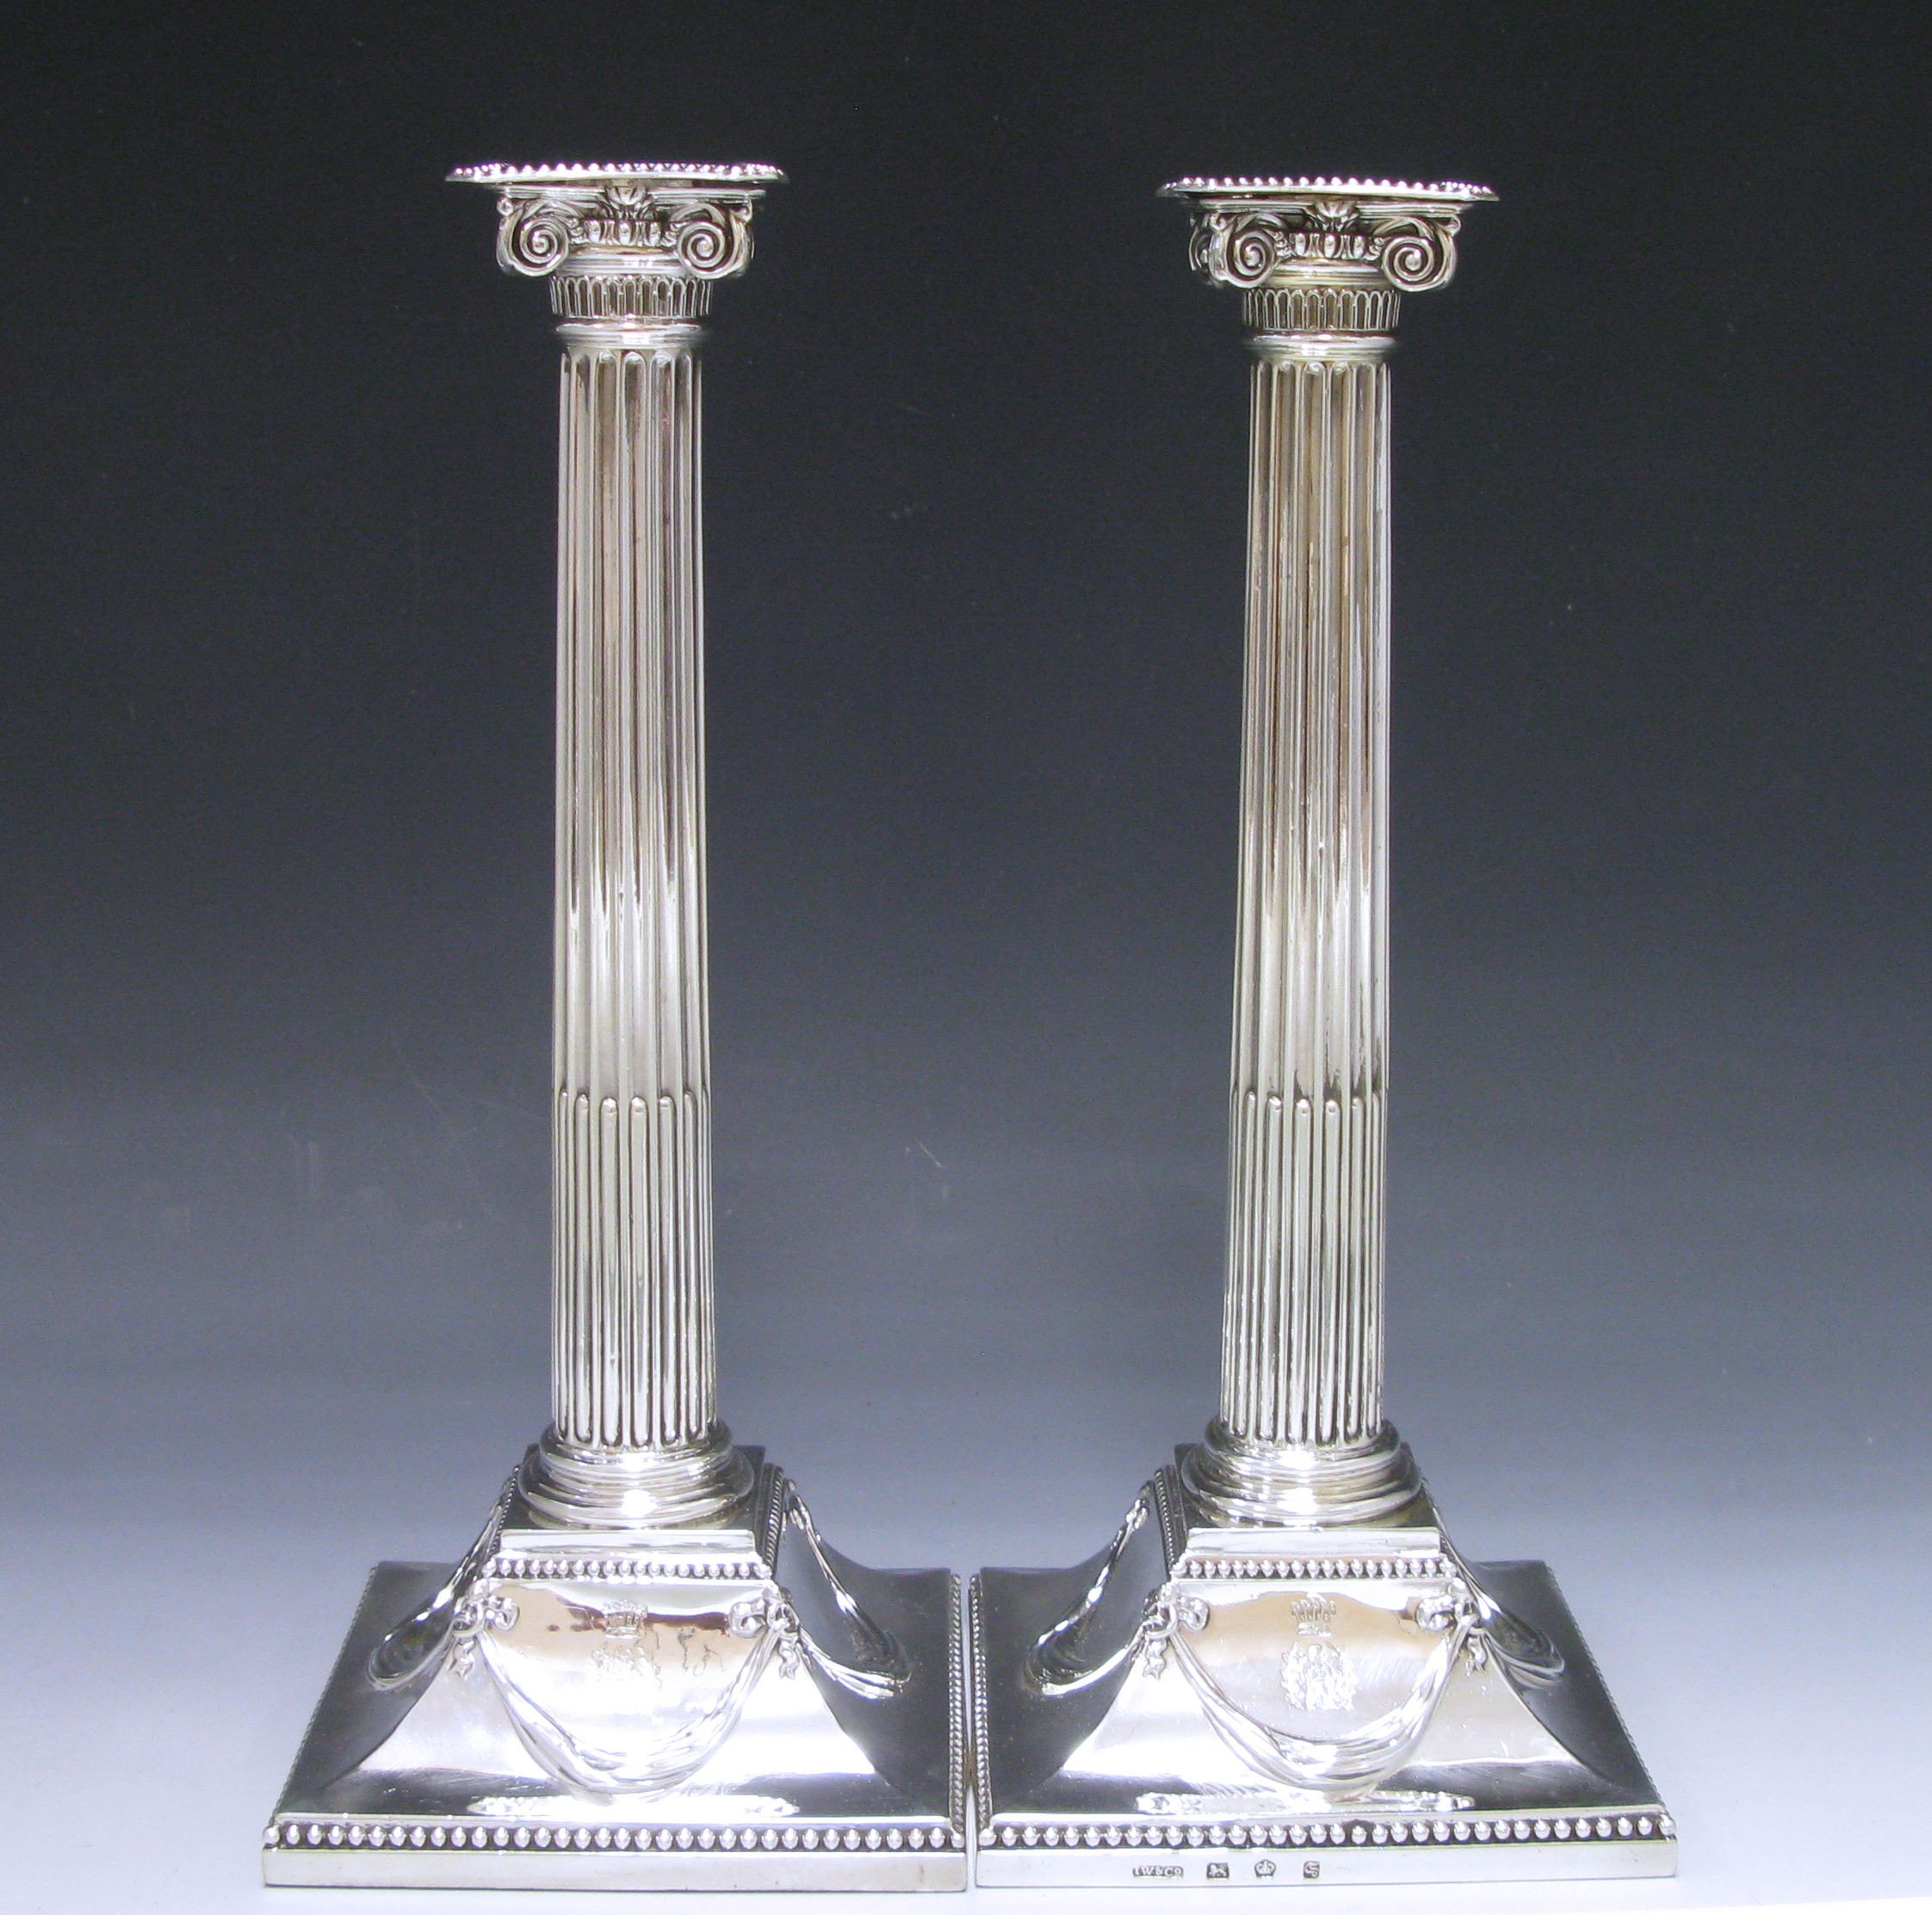 A Pair of George III Antique Silver Candlesticks  1